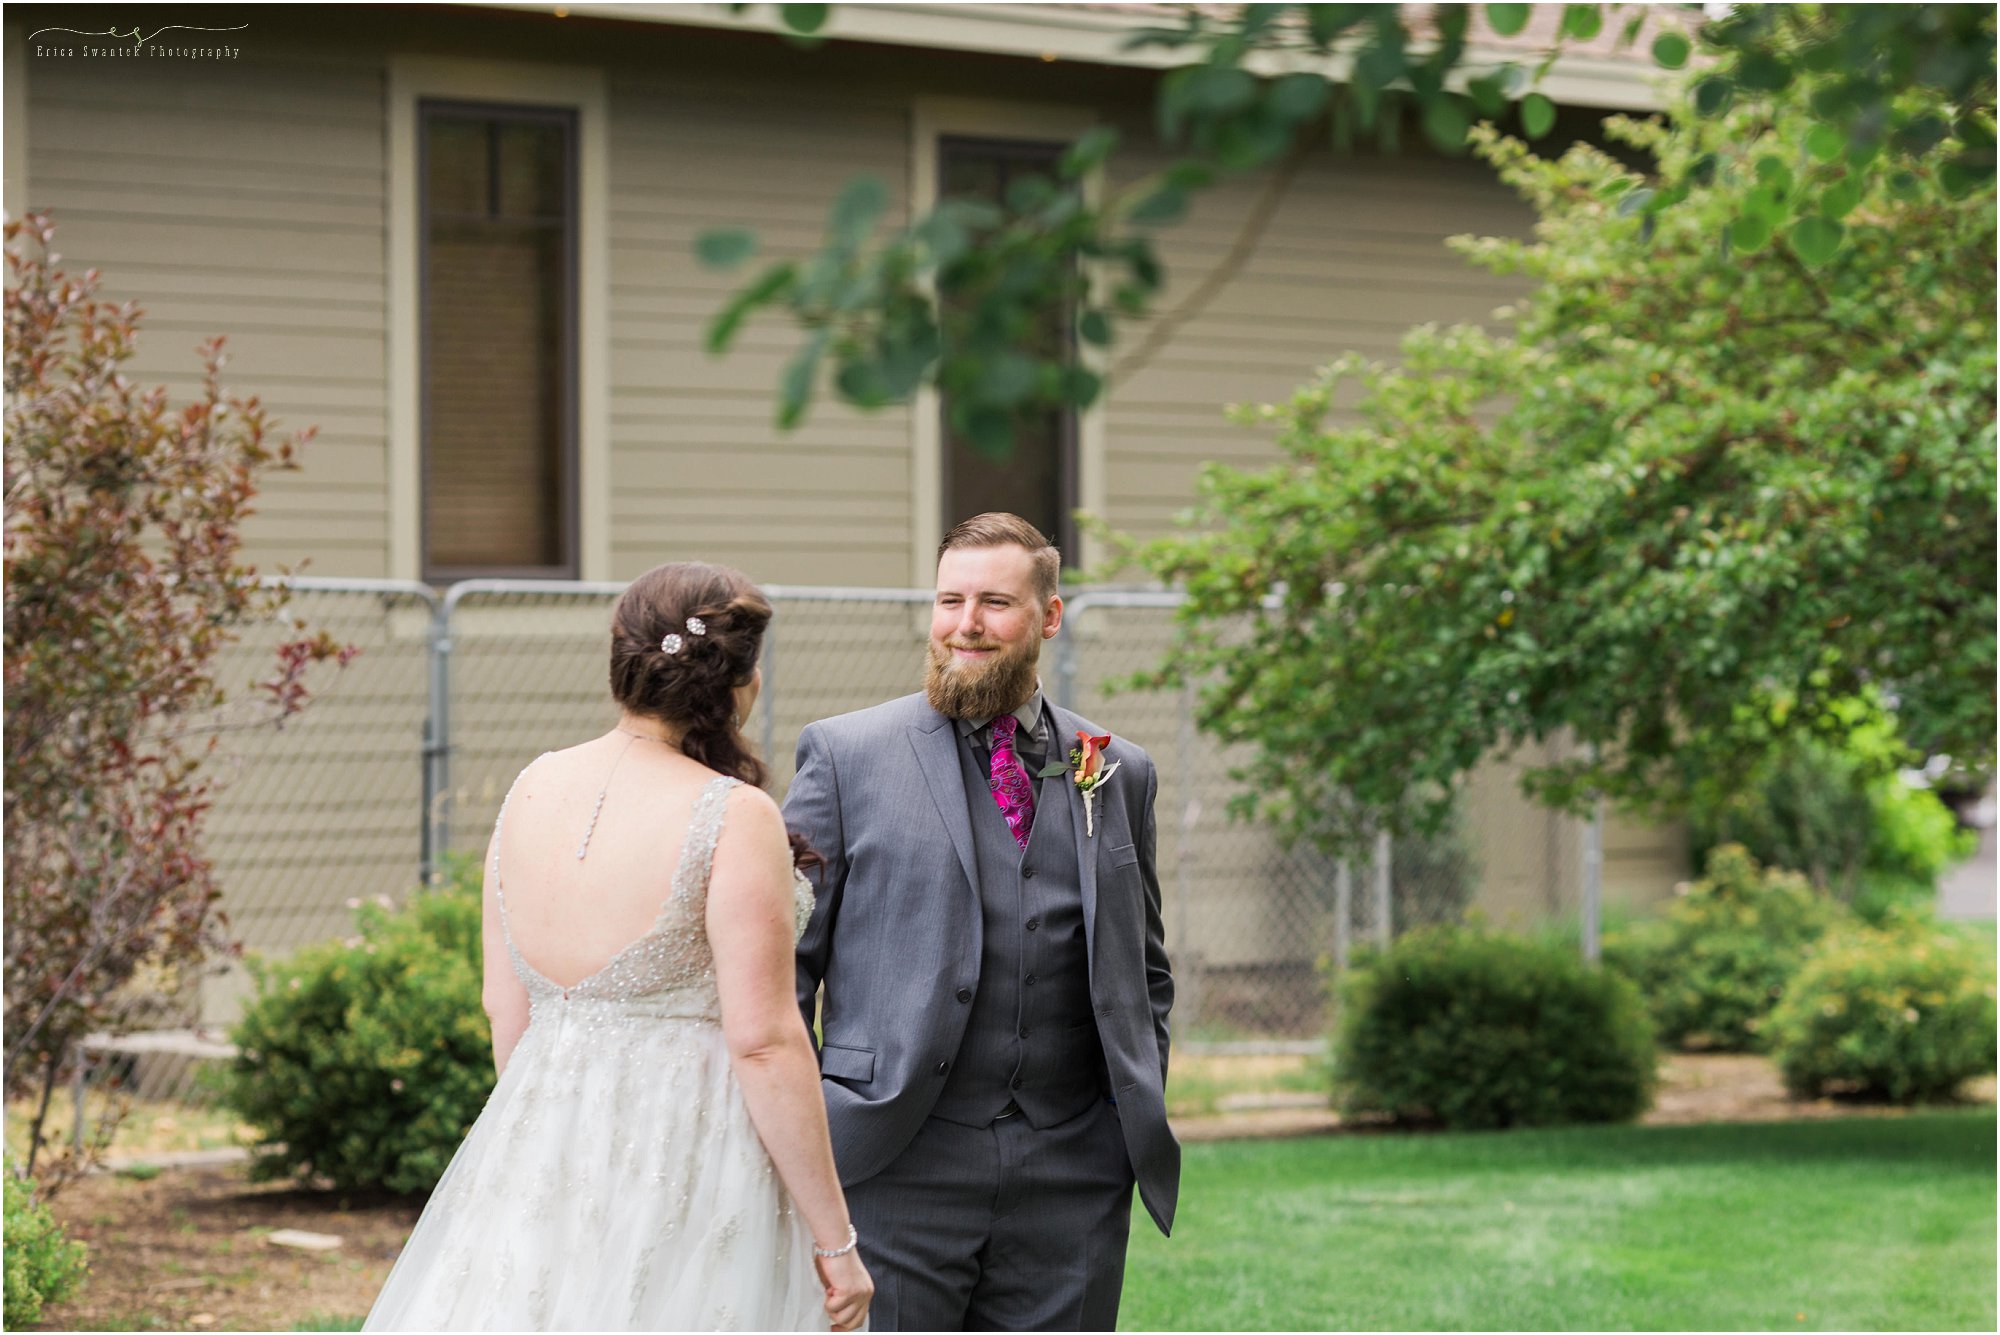 A groom sees his bride for the first time at their Bend, OR wedding. | Erica Swantek Photography